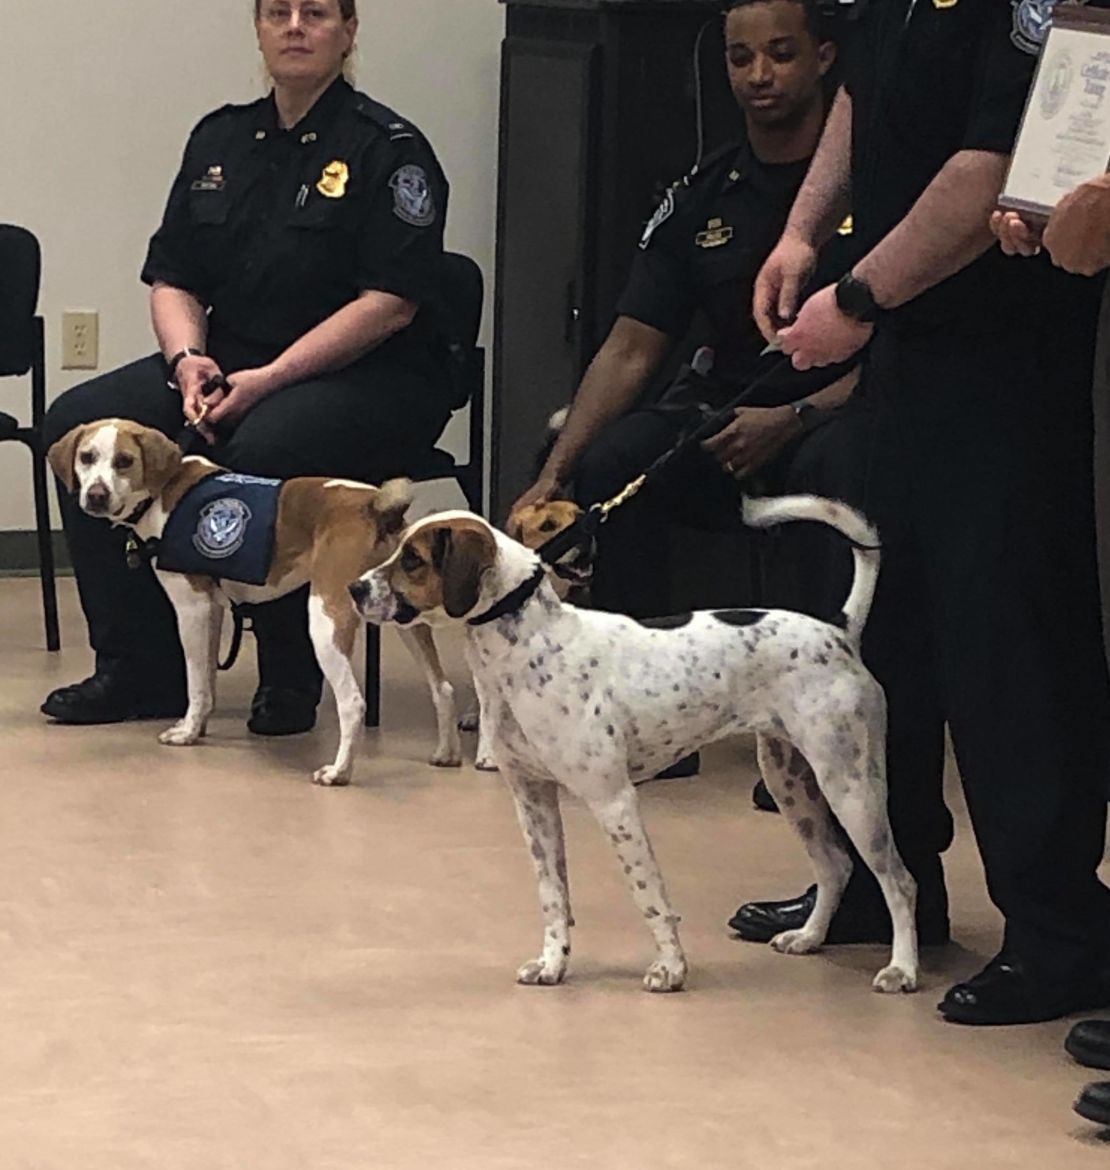 Cardie (right) had a broken femur and injured face when the USDA met her three months ago. They suspect Cardie was hit by a car before entering the animal shelter. Her wounds are now healed.